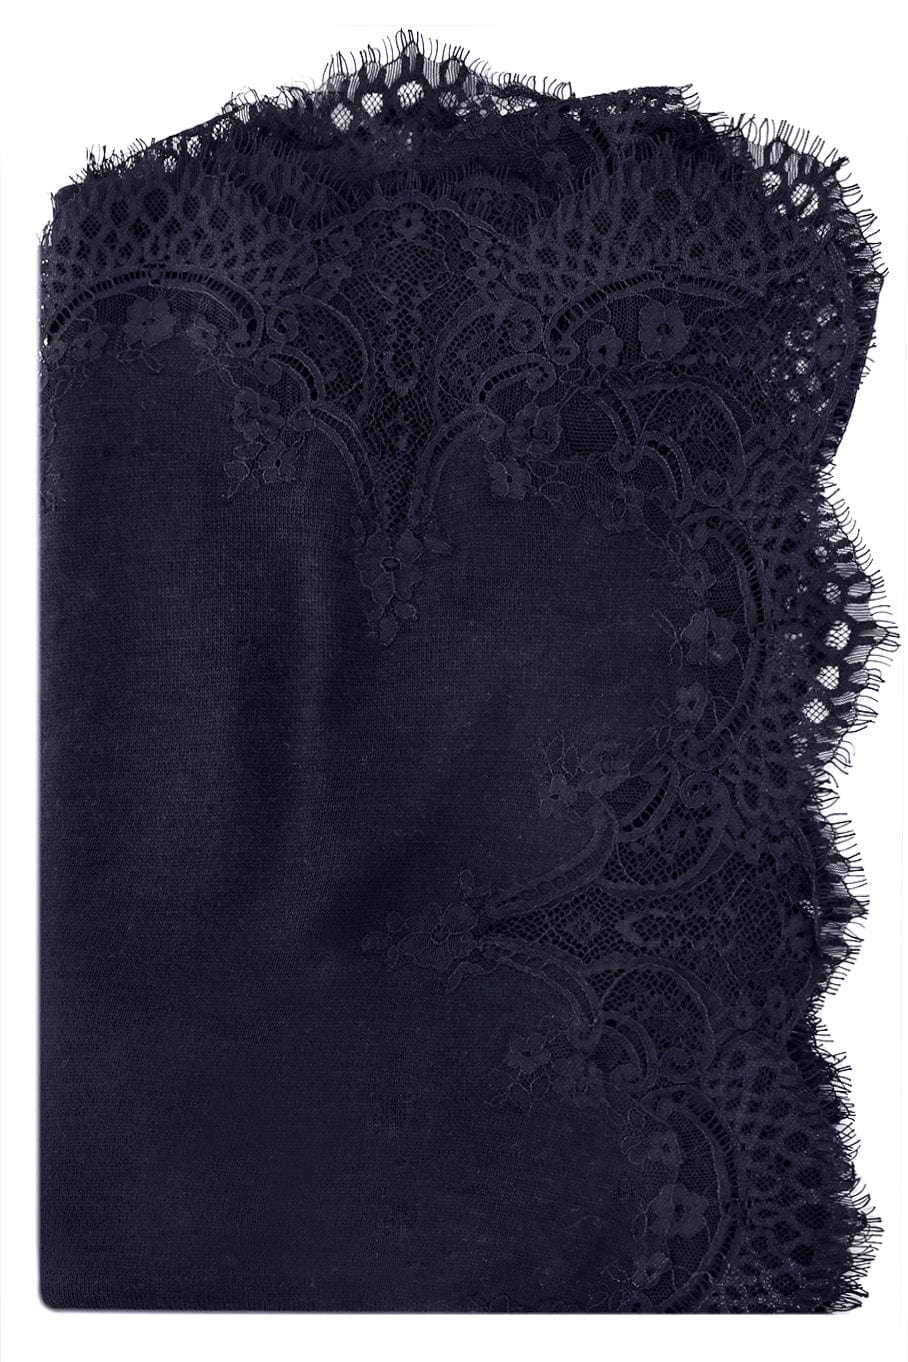 Lace Scarf - Navy ACCESSORIESCARVES JANAVI INDIA   